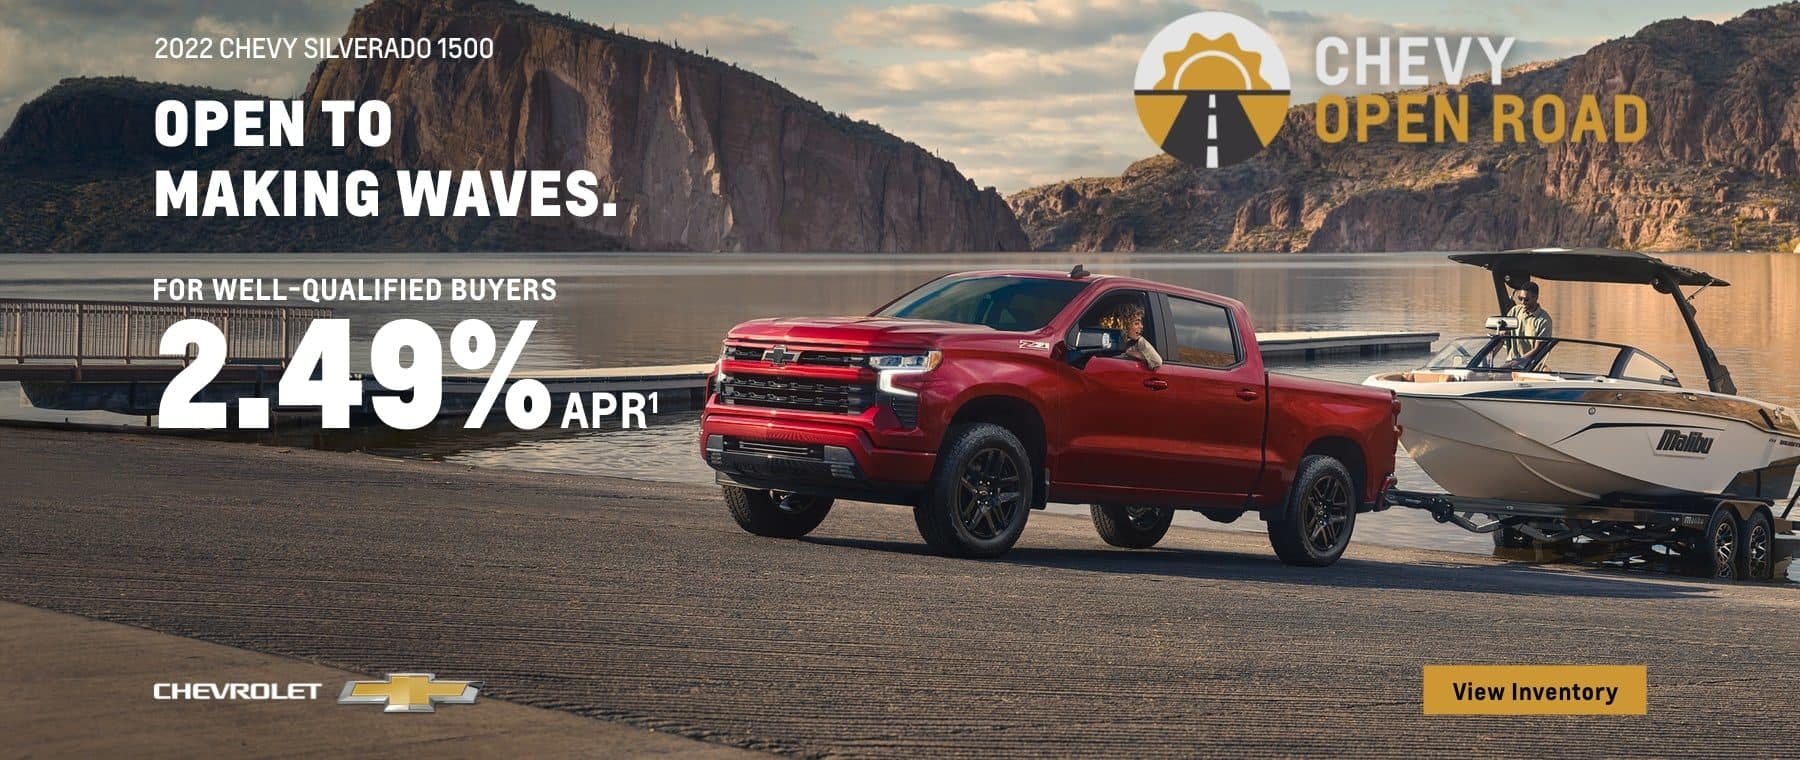 2022 Chevy Silverado 1500. Chevy Open Road. For well-qualified buyers 2.49% APR.